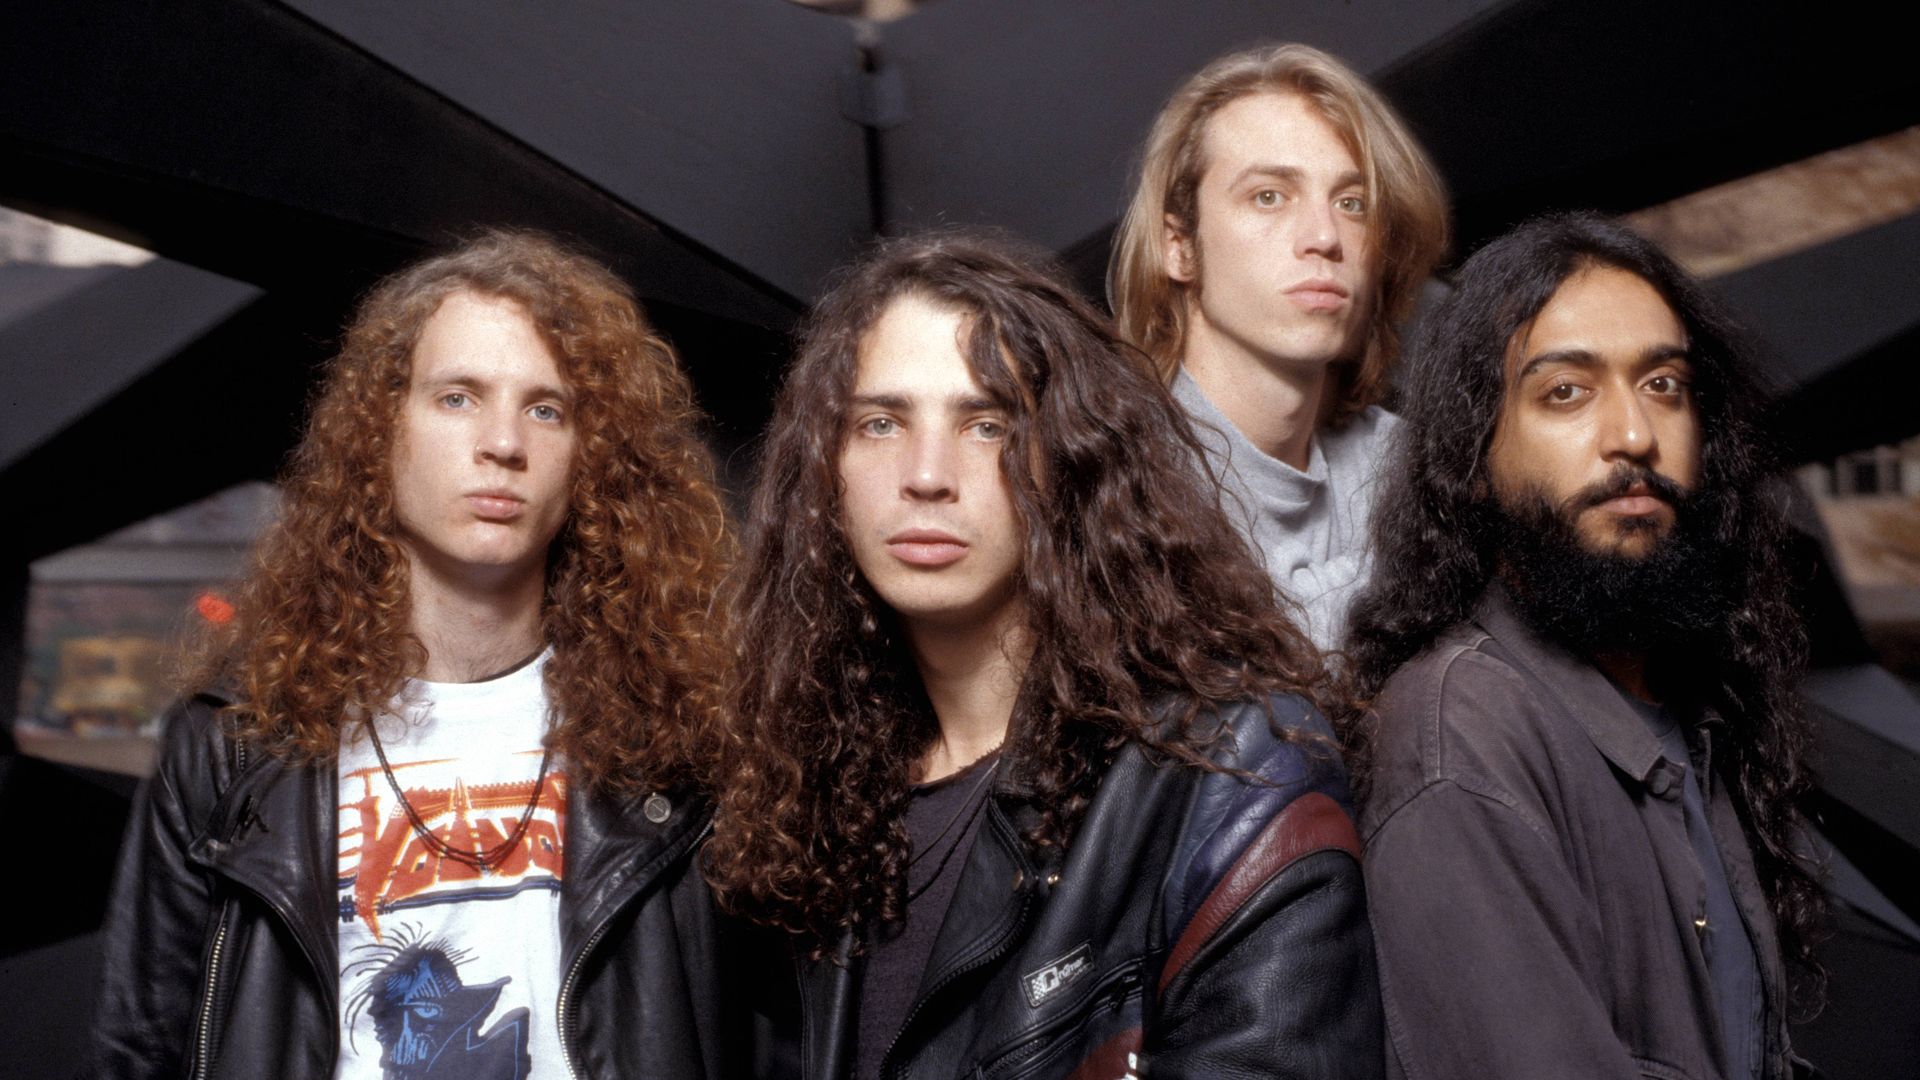 Four members of Soundgarden are shown looking directly at the camera.